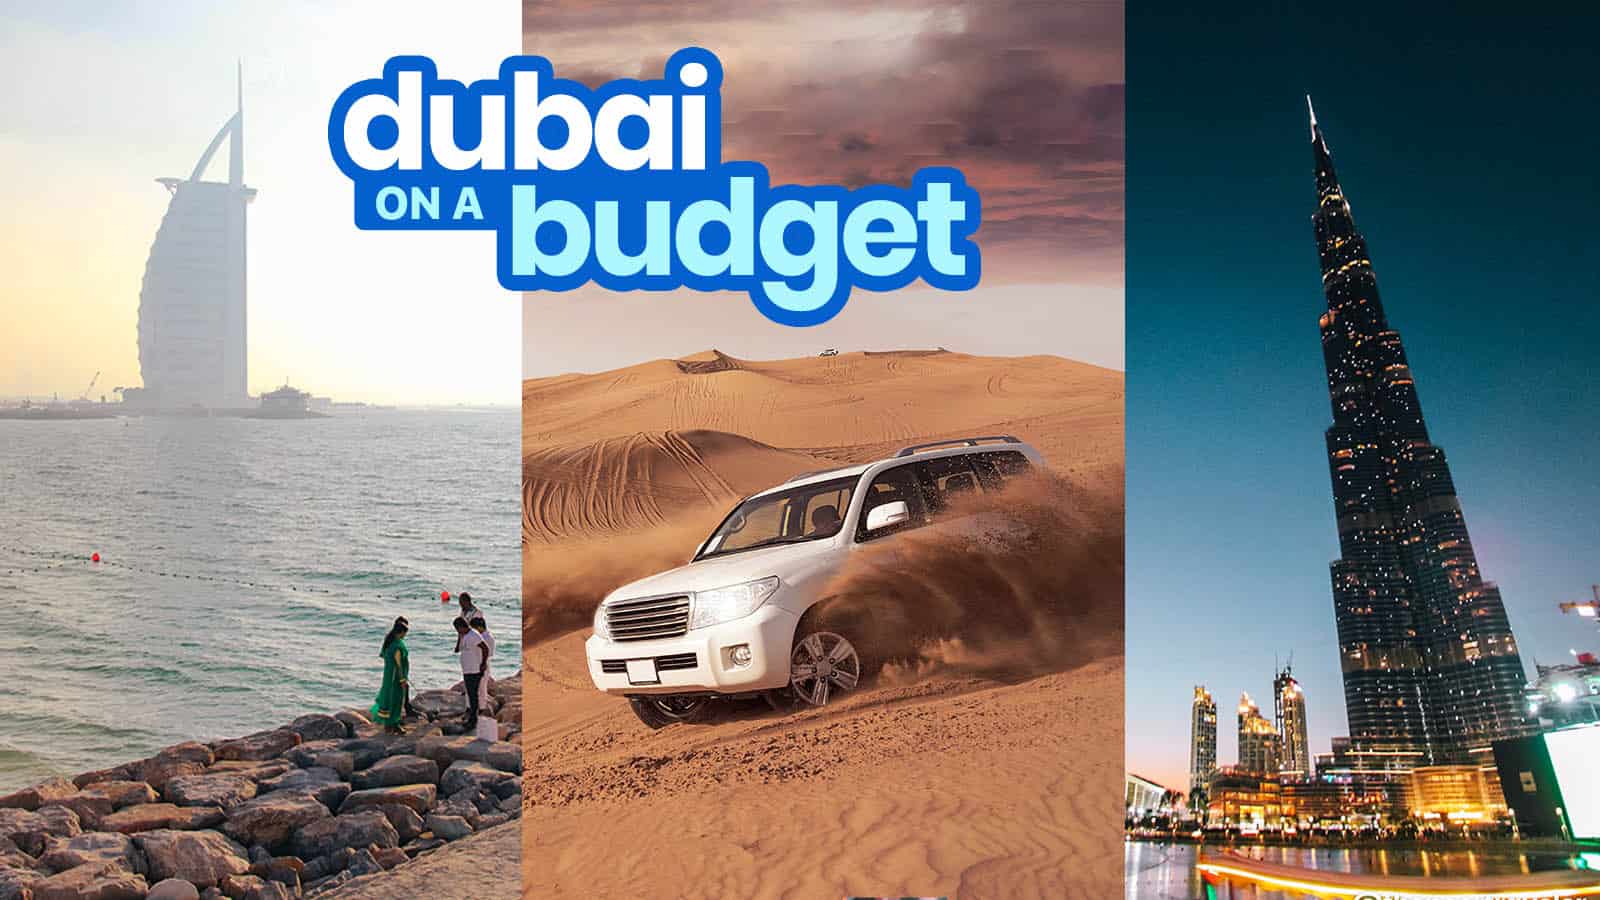 DUBAI TRAVEL GUIDE with Budget Itinerary